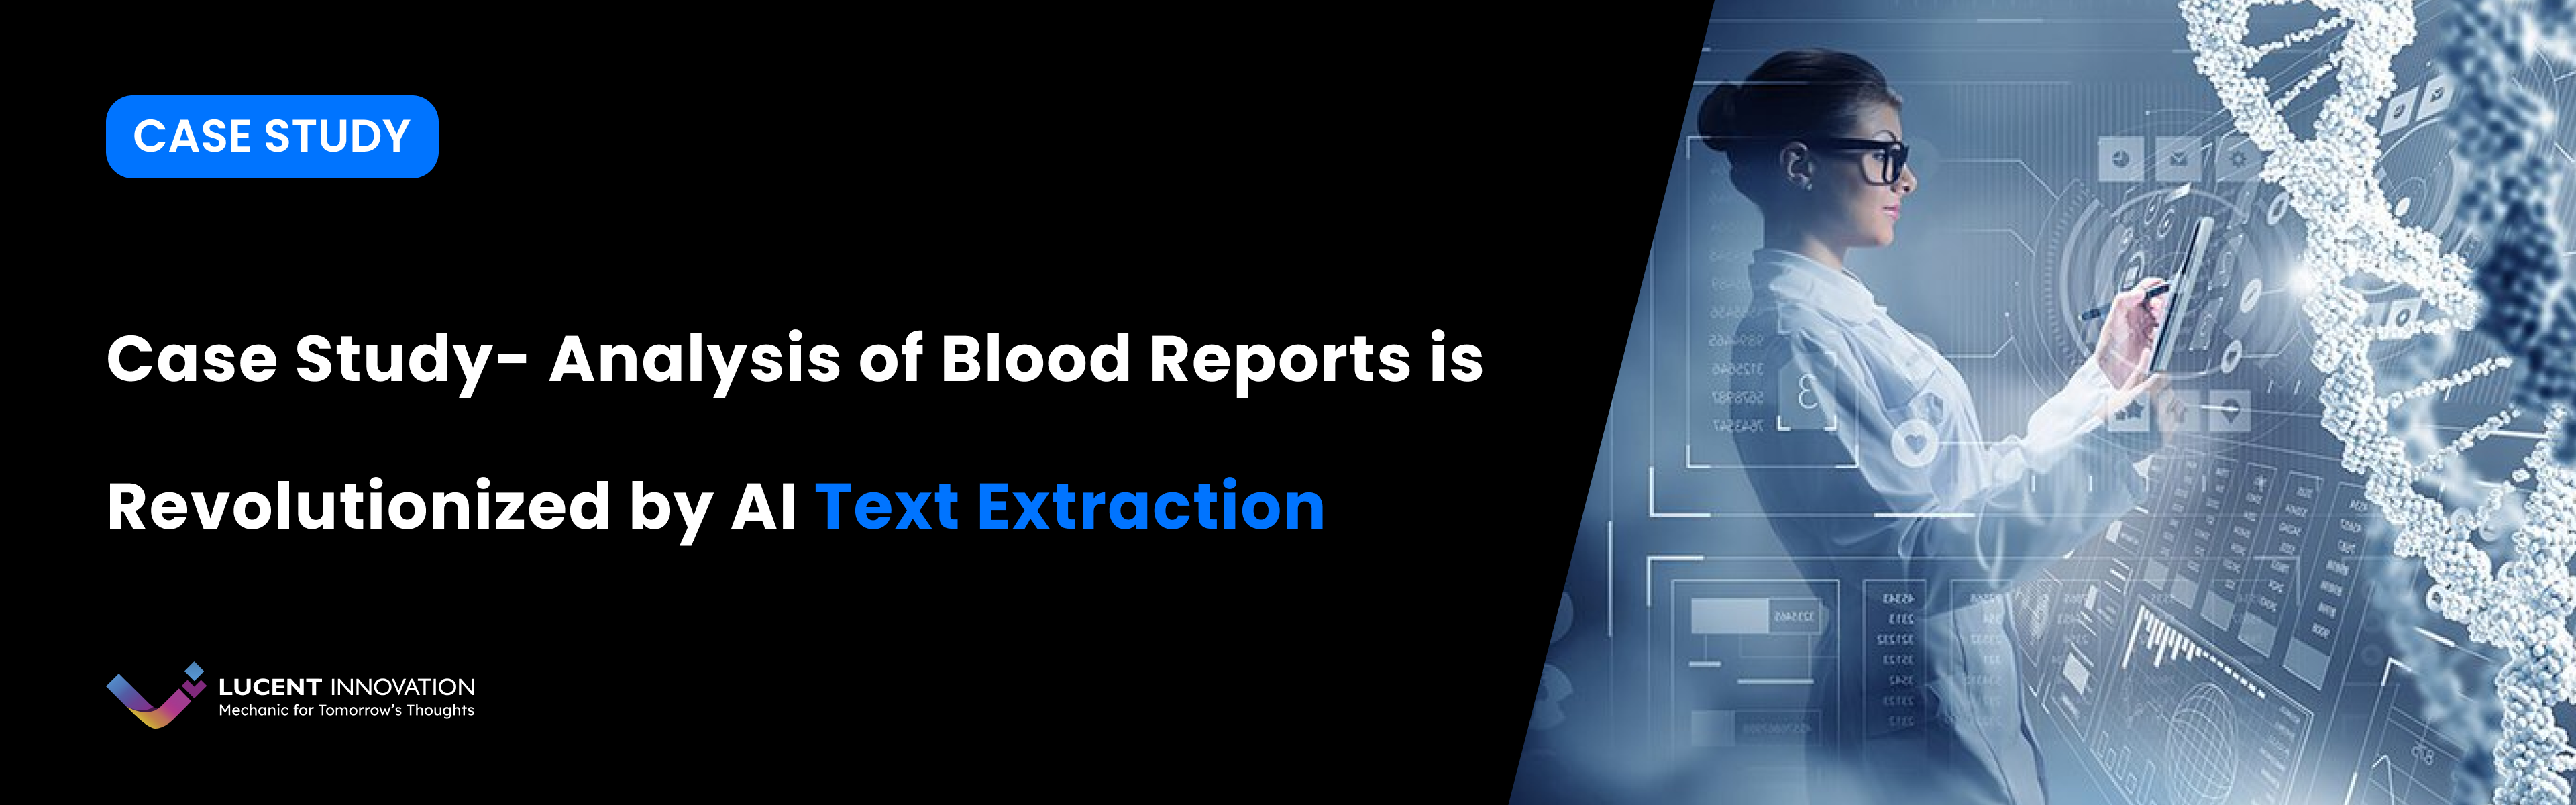 Case Study of Analysis of Blood Reports by AI Text Extraction